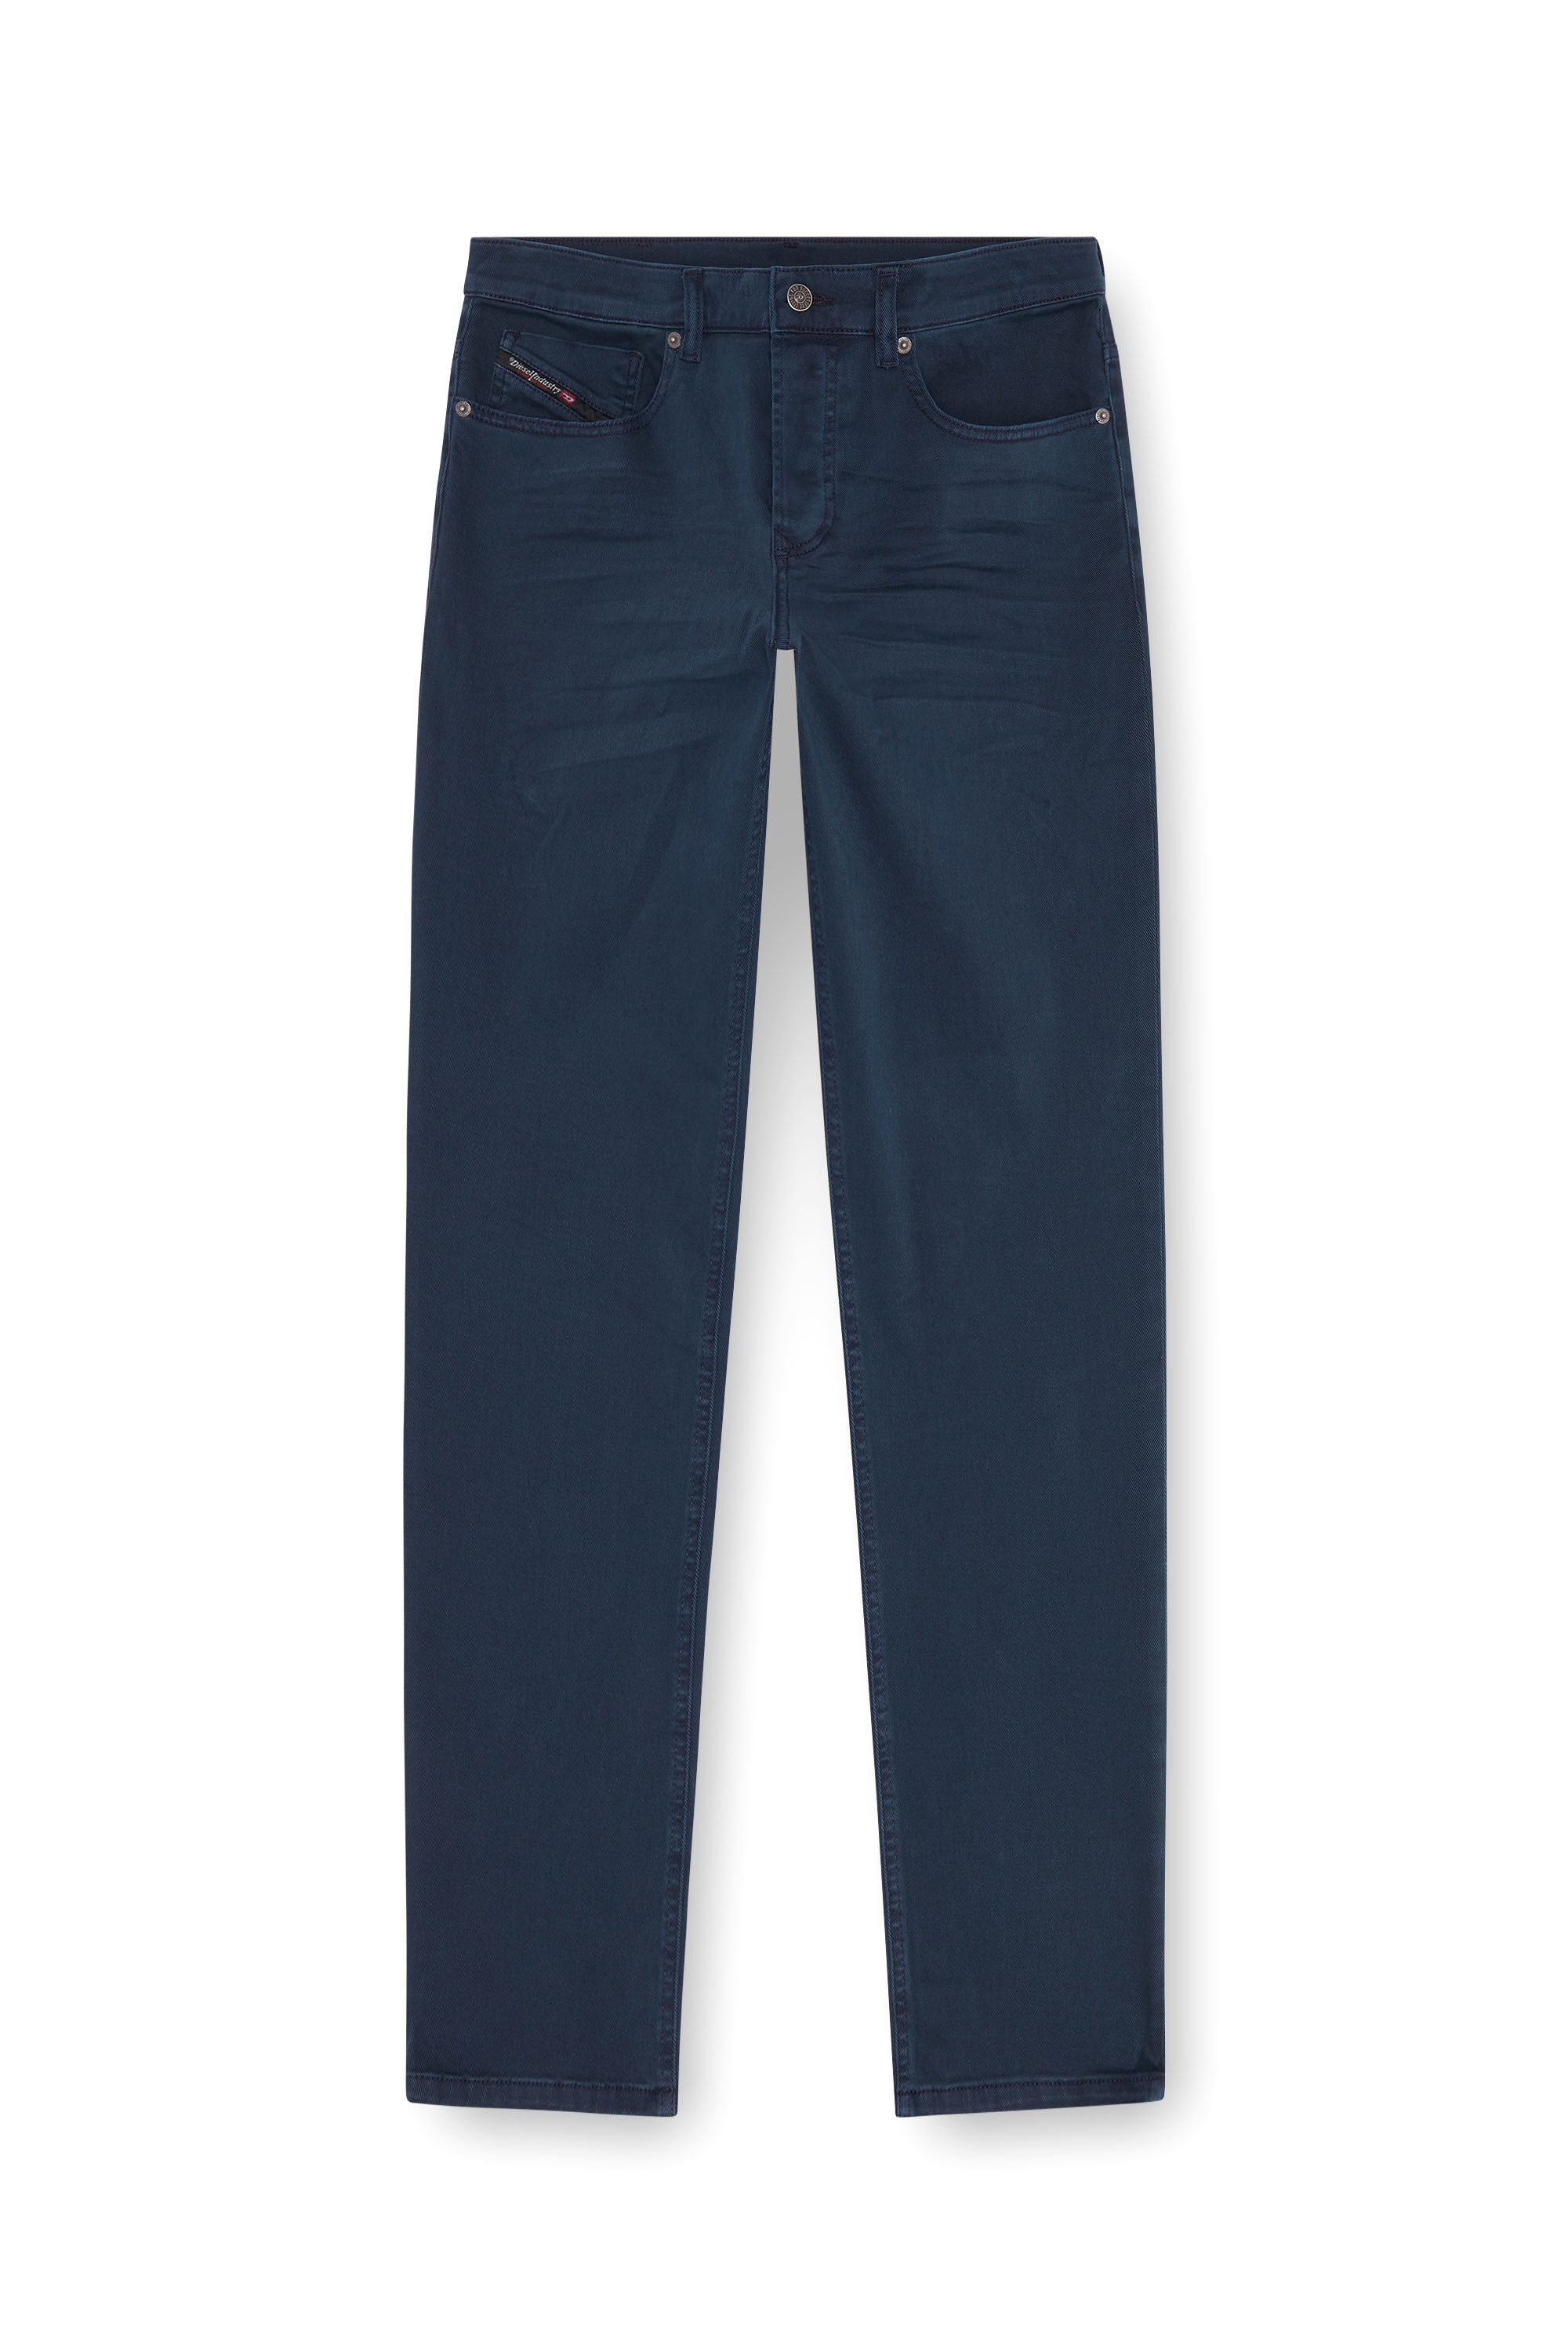 Diesel - Tapered Jeans 2023 D-Finitive 0QWTY, Hombre Tapered Jeans - 2023 D-Finitive in Azul marino - Image 2